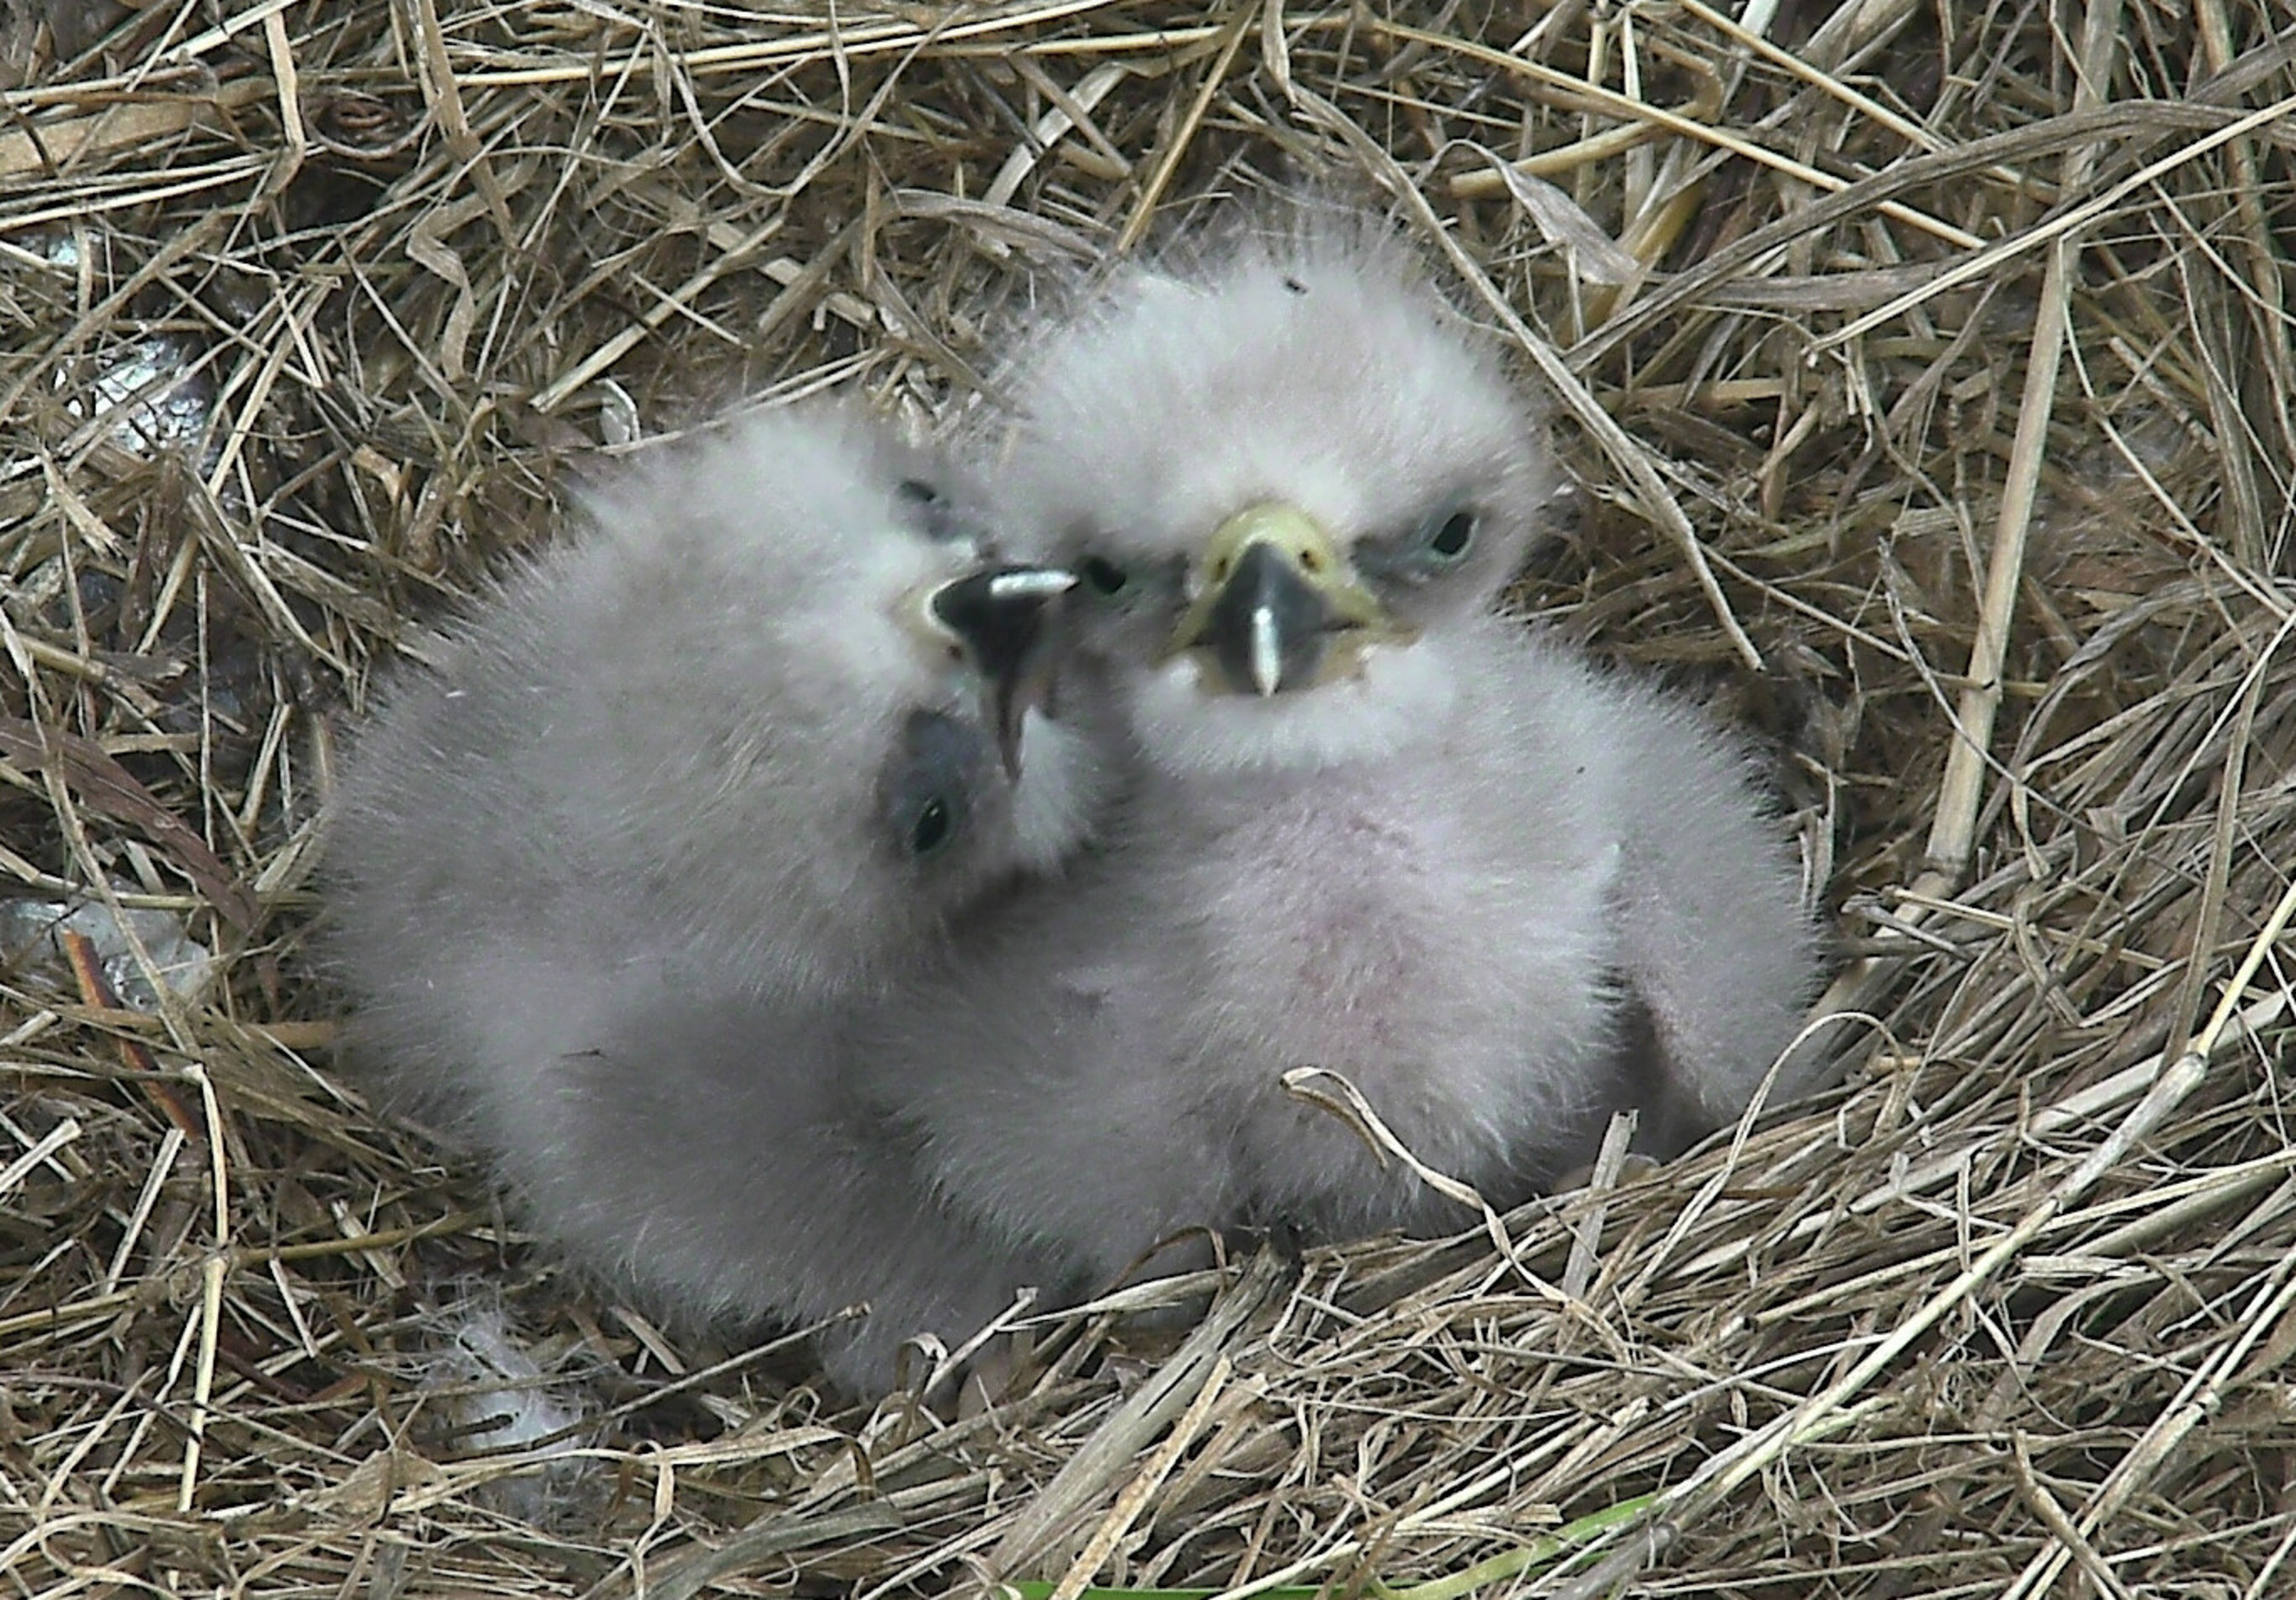 After weeks inside their eggs, these two siblings finally meet! The American Eagle Foundation and the cooperative partners of the D.C. Eagle Cam project are proud to announce that there are now two healthy eaglets residing in the nest that sits high in a Tulip Poplar tree in the U.S. National Arboretum, right inside the Nation's Capitol. Watch LIVE 24/7 on dceaglecam.eagles.org. Photo (C) American Eagle Foundation / www.eagles.org (Screenshot captured online by Carol Ceasar)